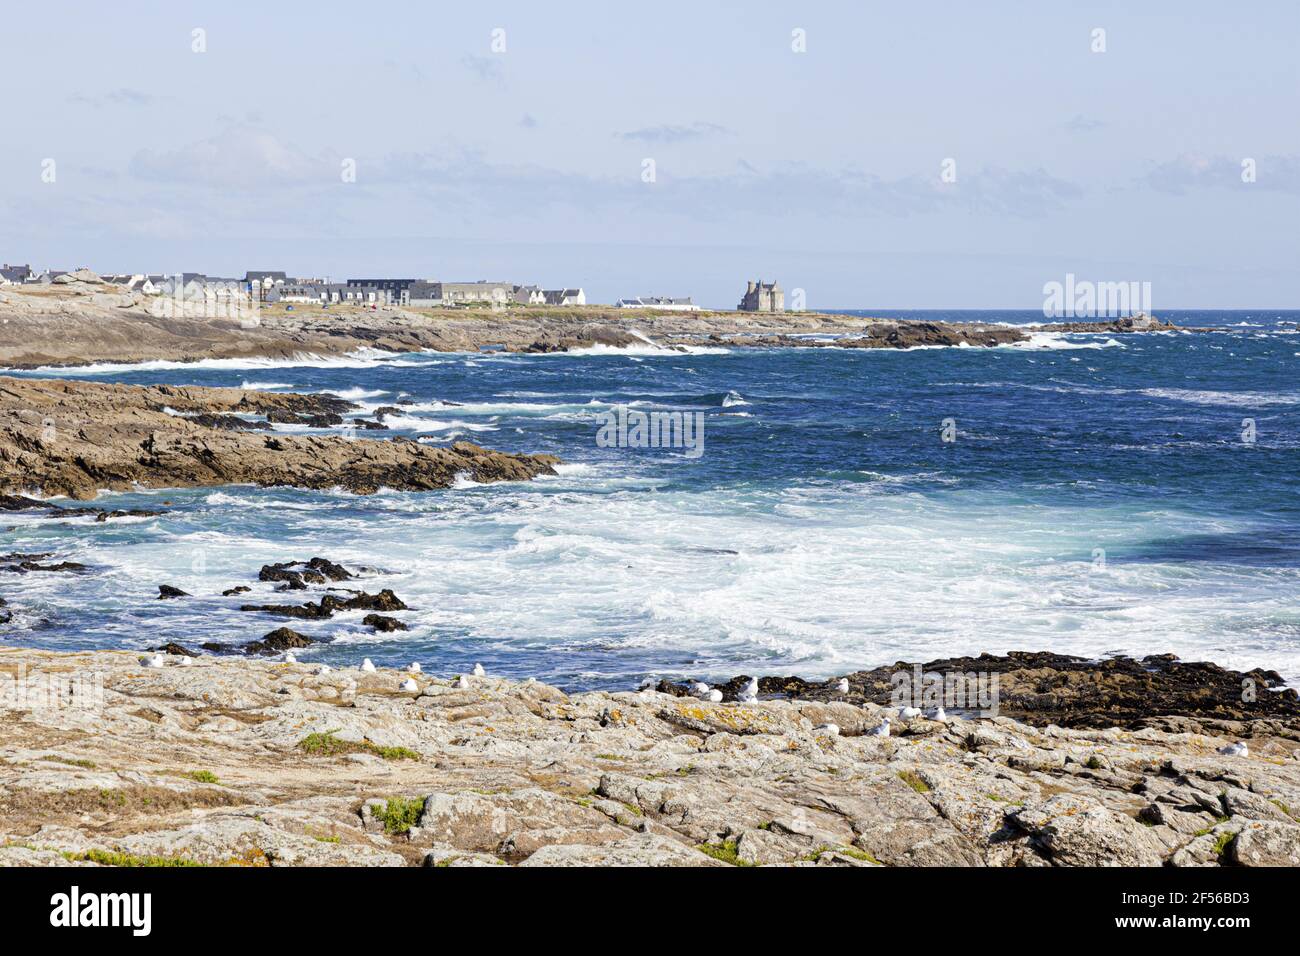 The western coast of the Quiberon Peninsula - the Cote Sauvage - at Beg er Goalennec, Brittany, France Stock Photo